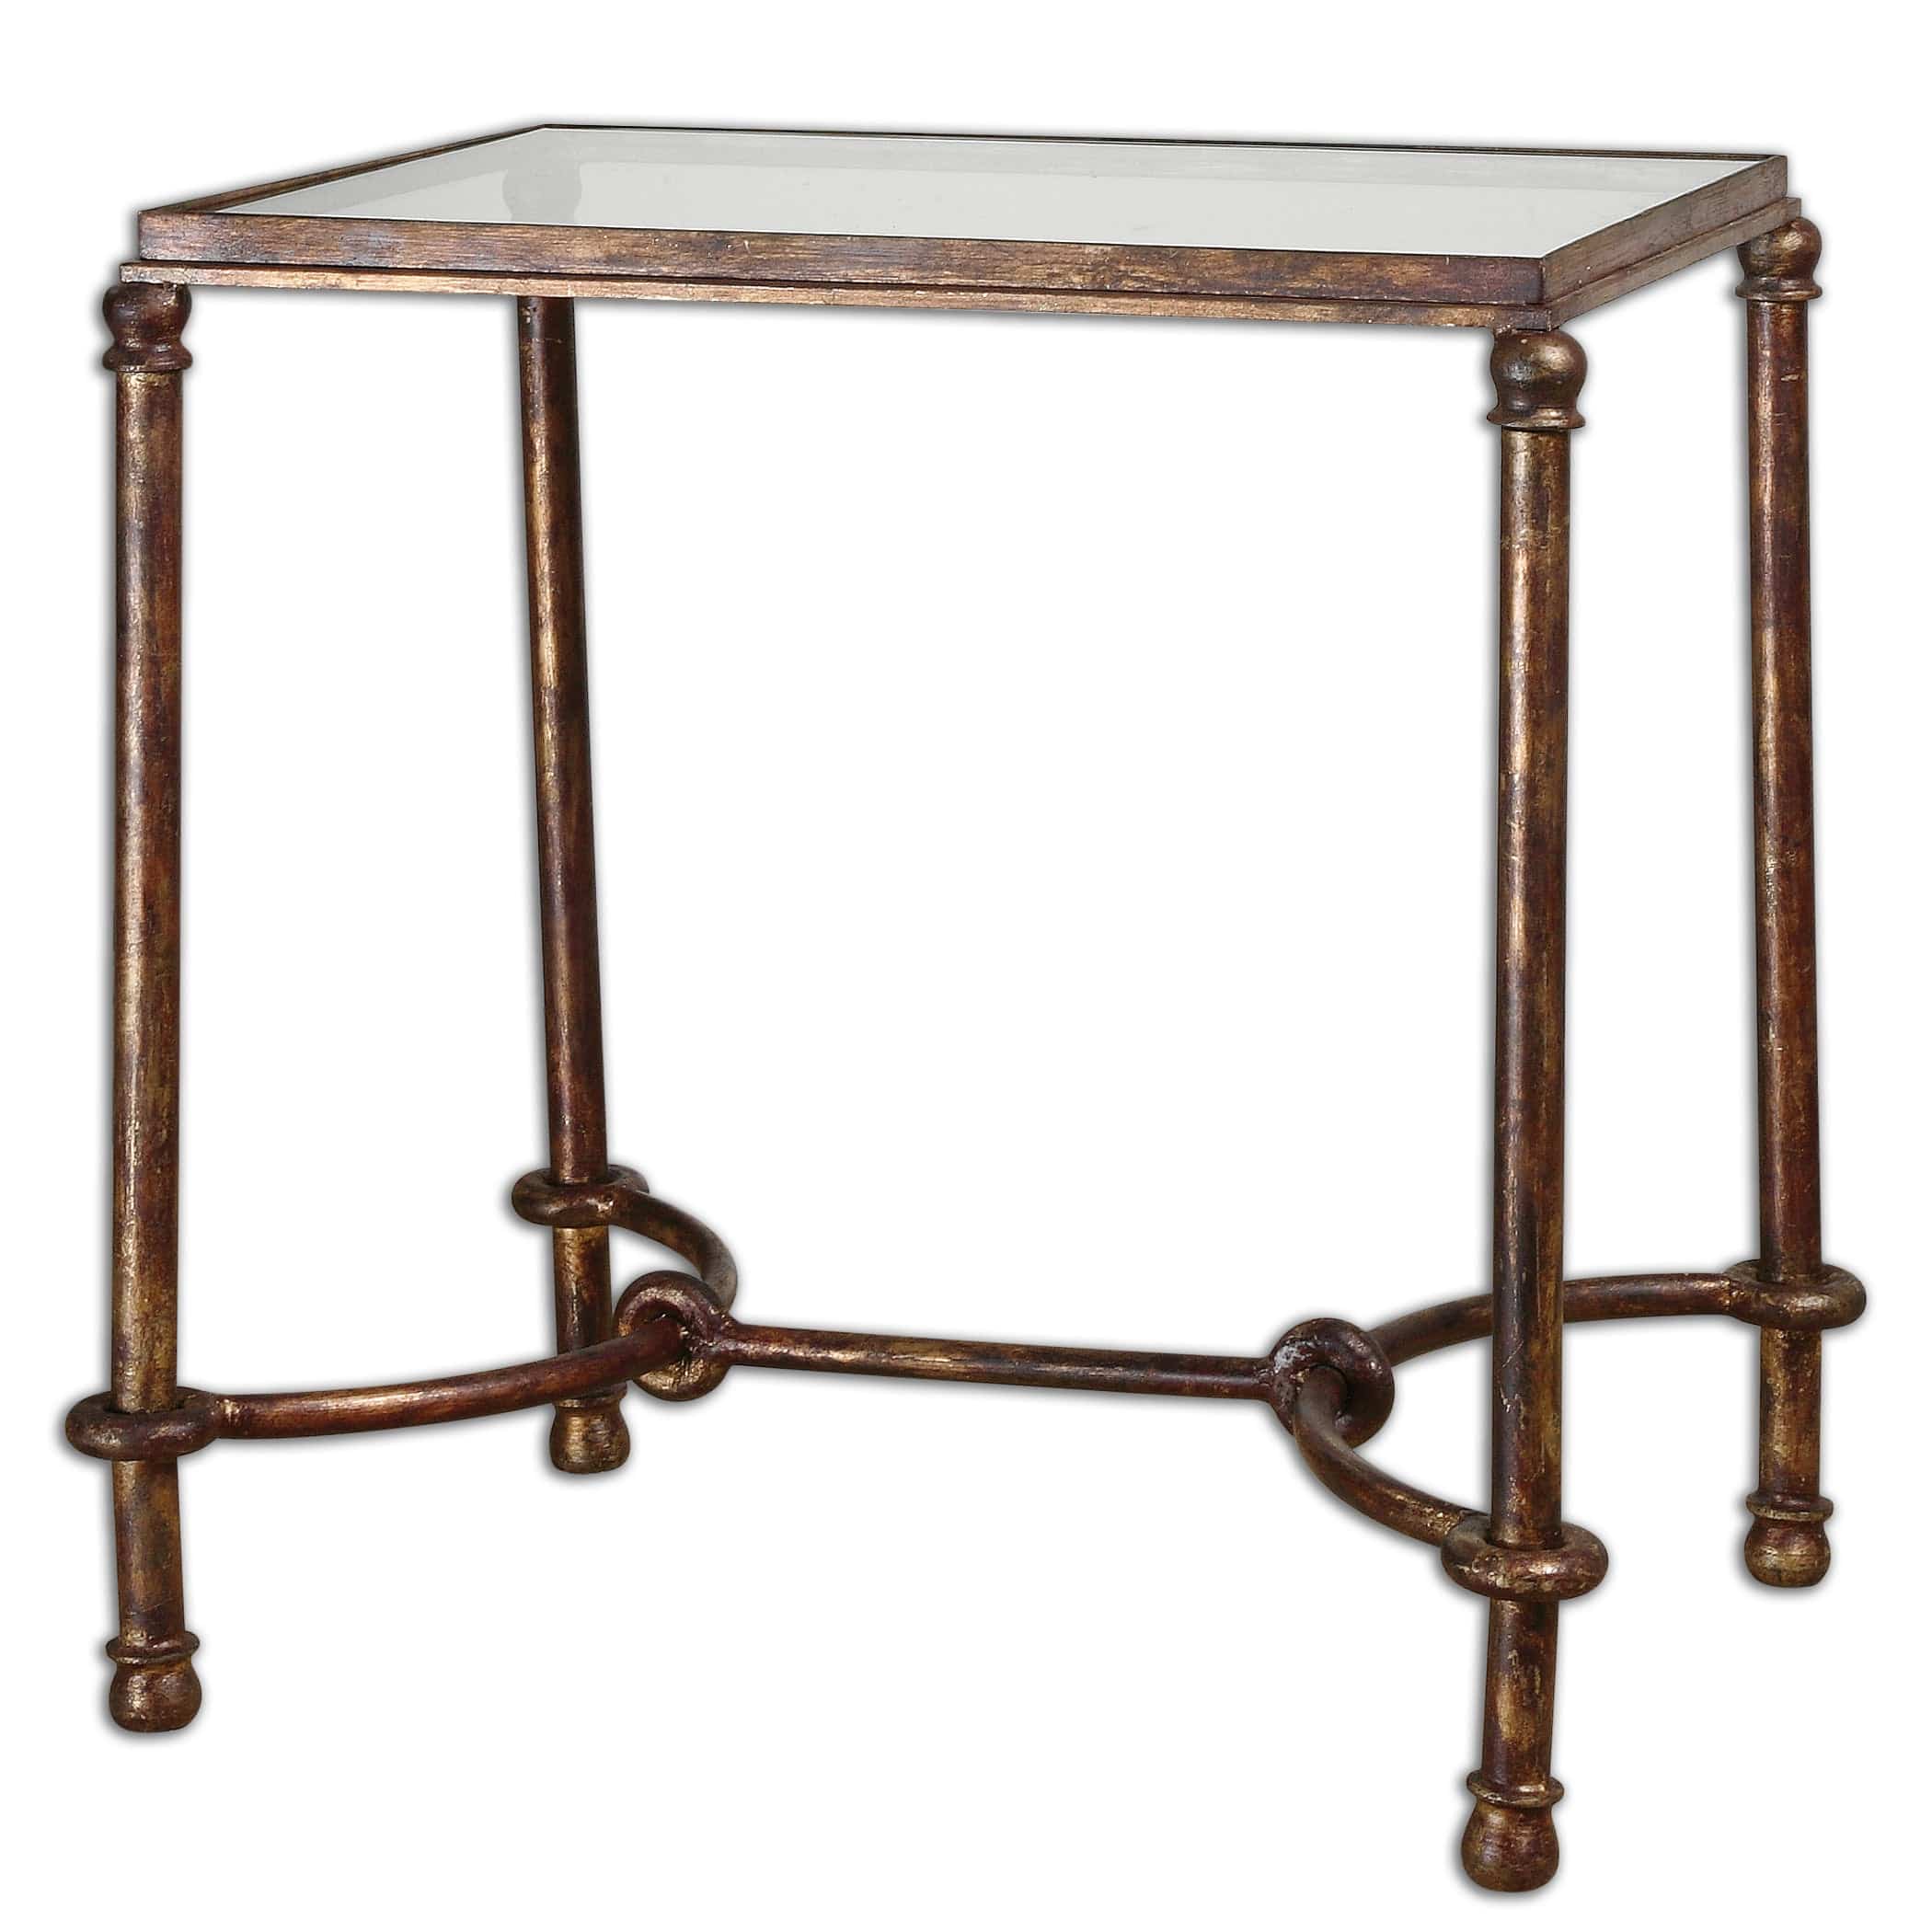 Warring Iron End Table Uttermost